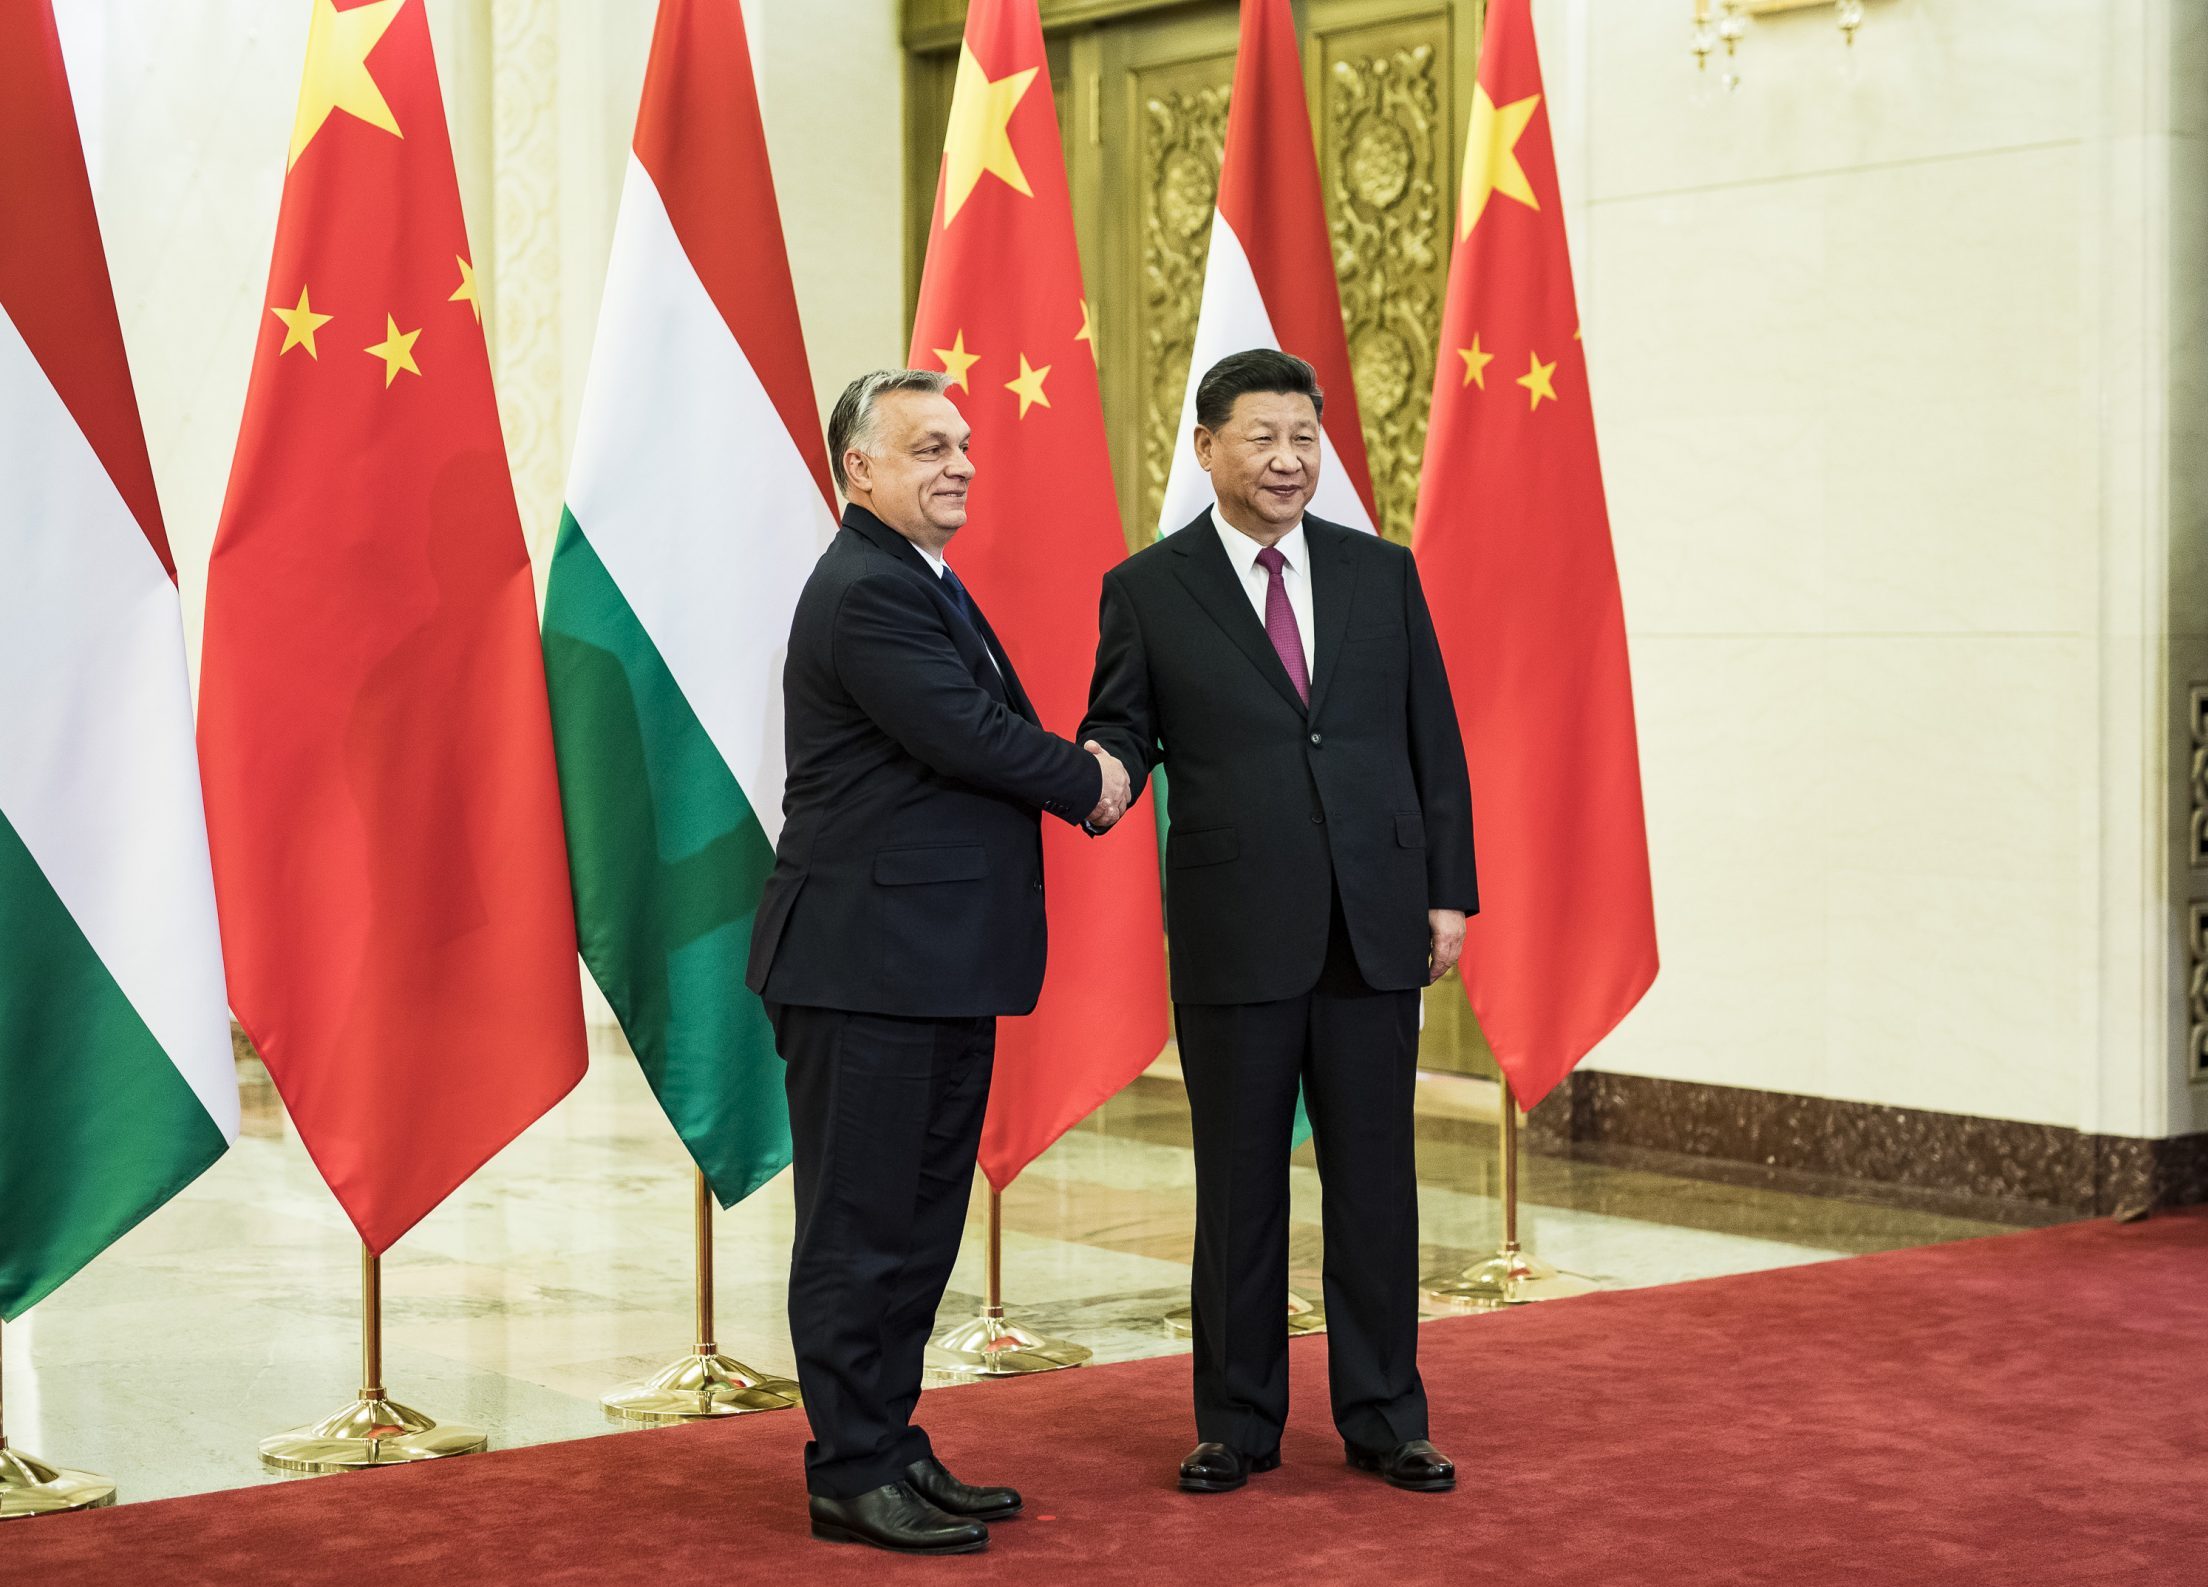 The Geopolitical Relevance of Viktor Orbán's Planned Trip to China